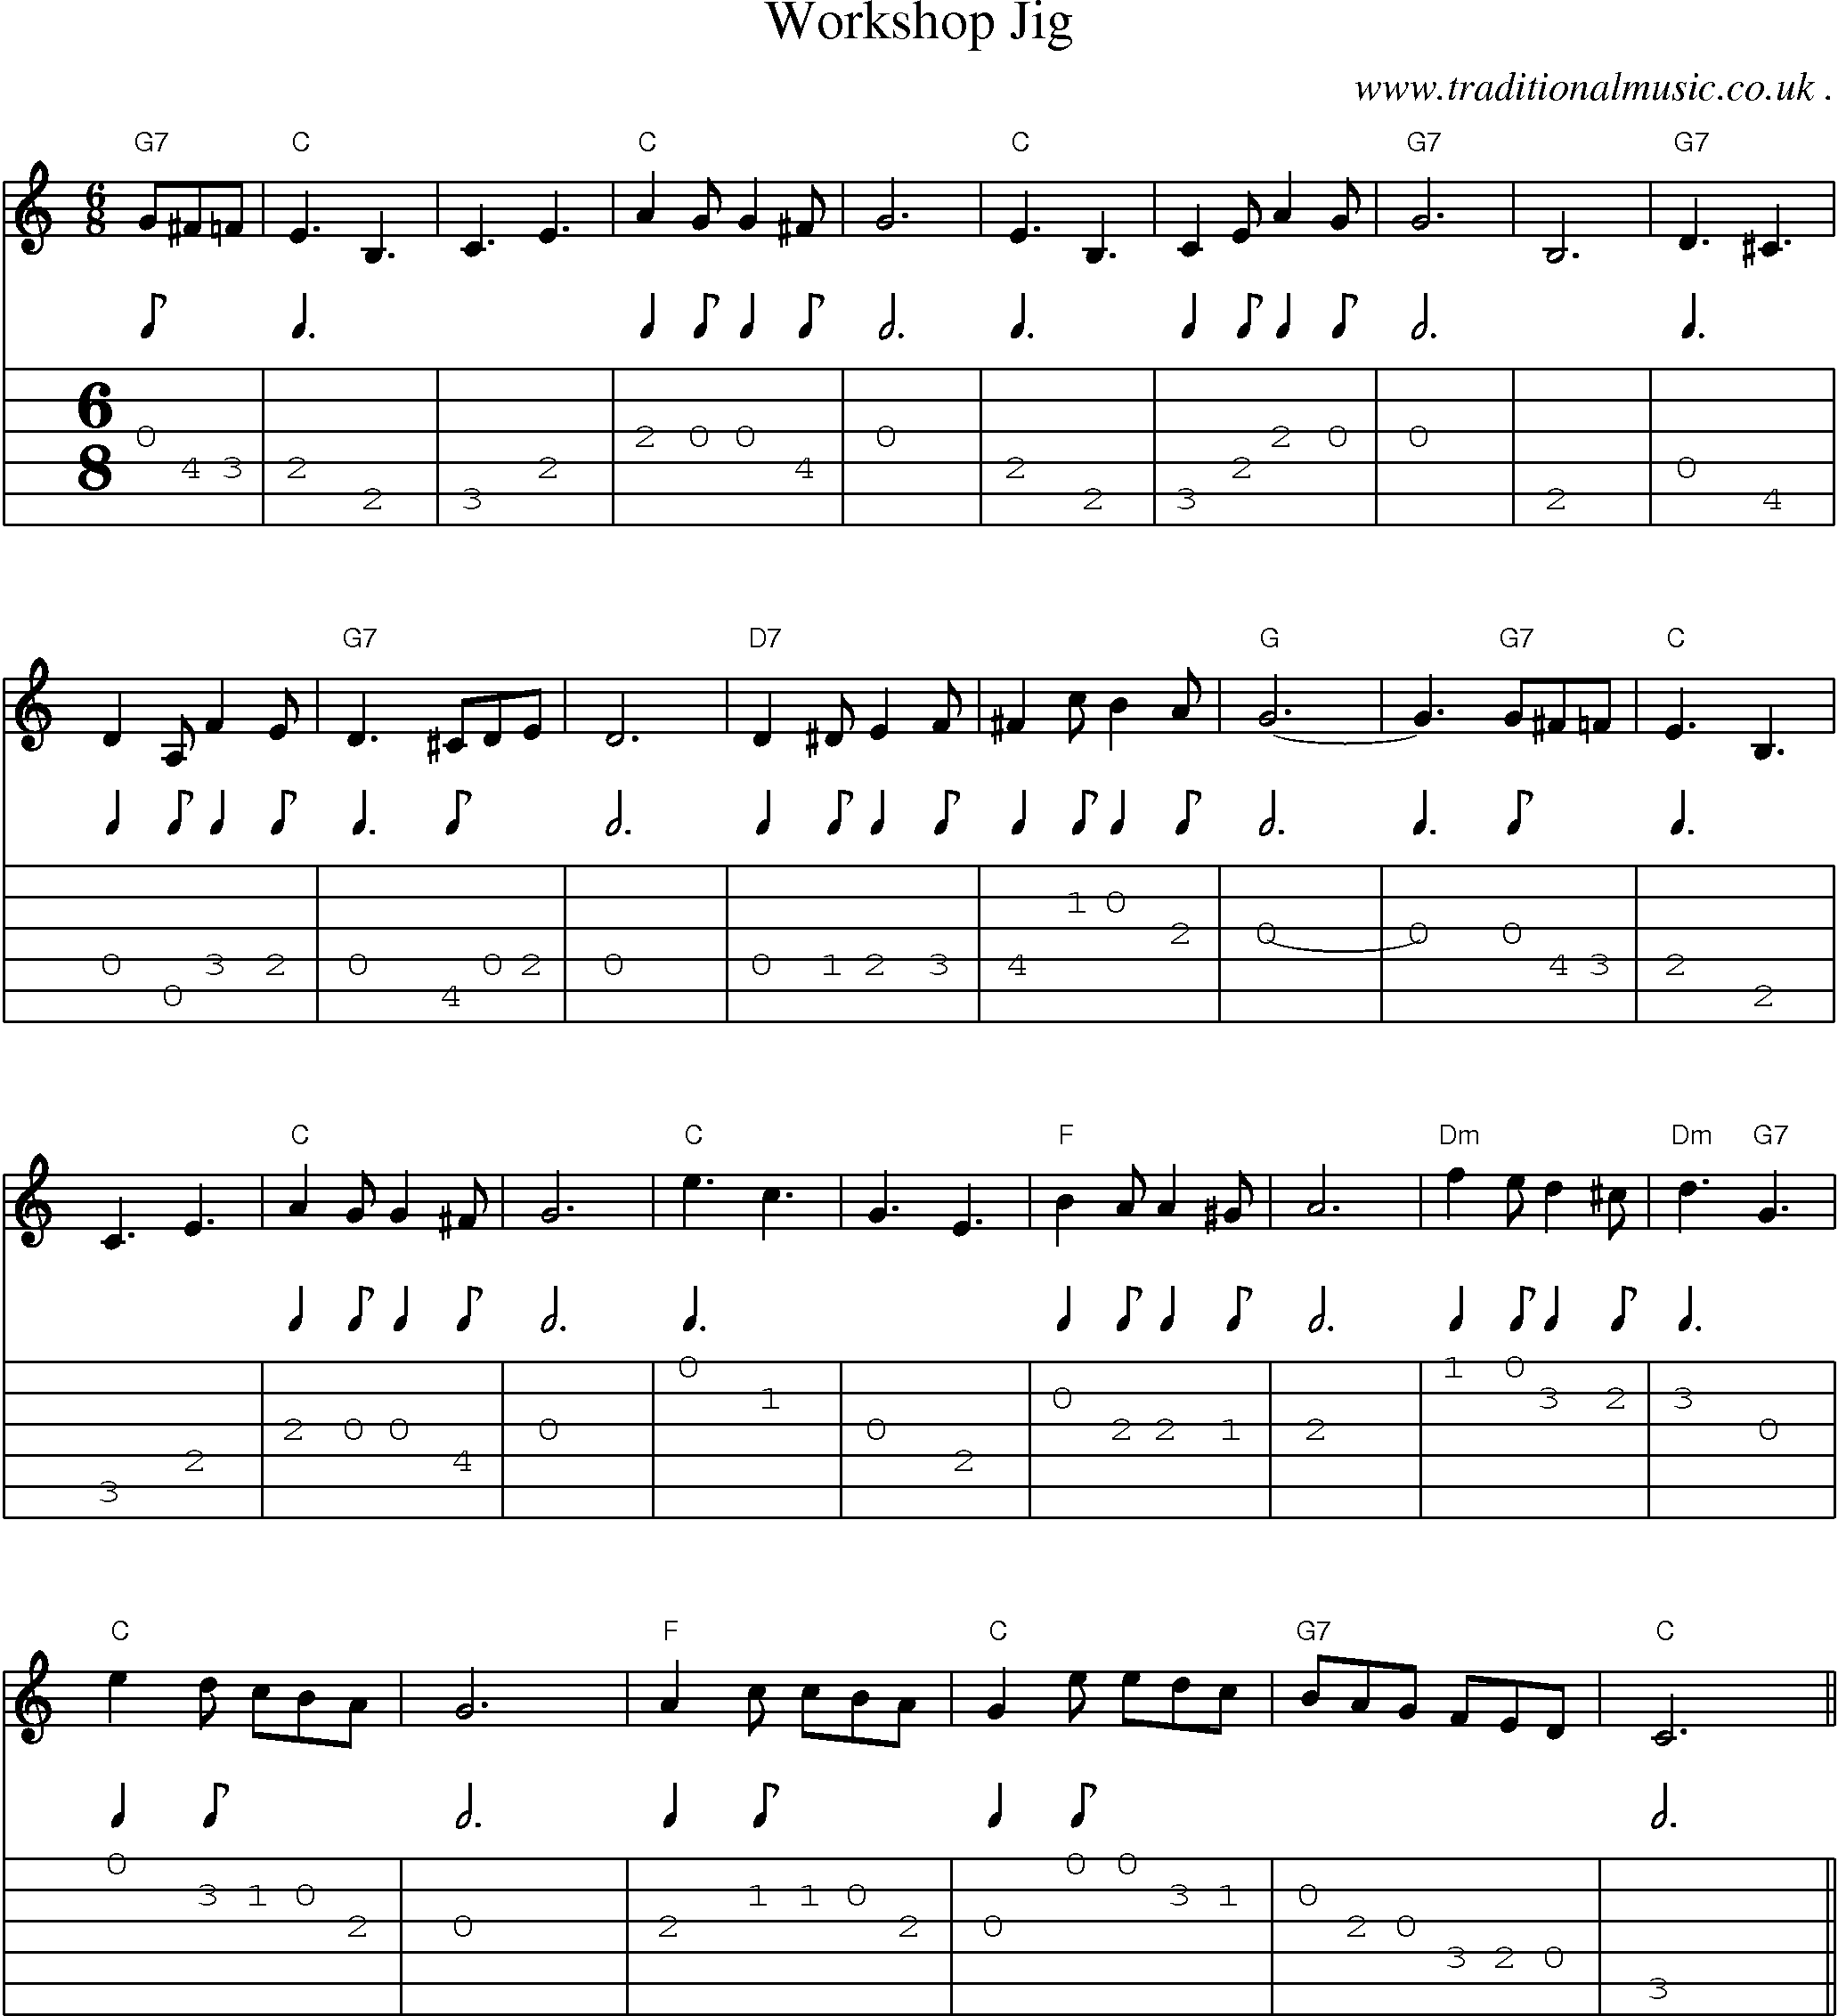 Sheet-Music and Guitar Tabs for Workshop Jig